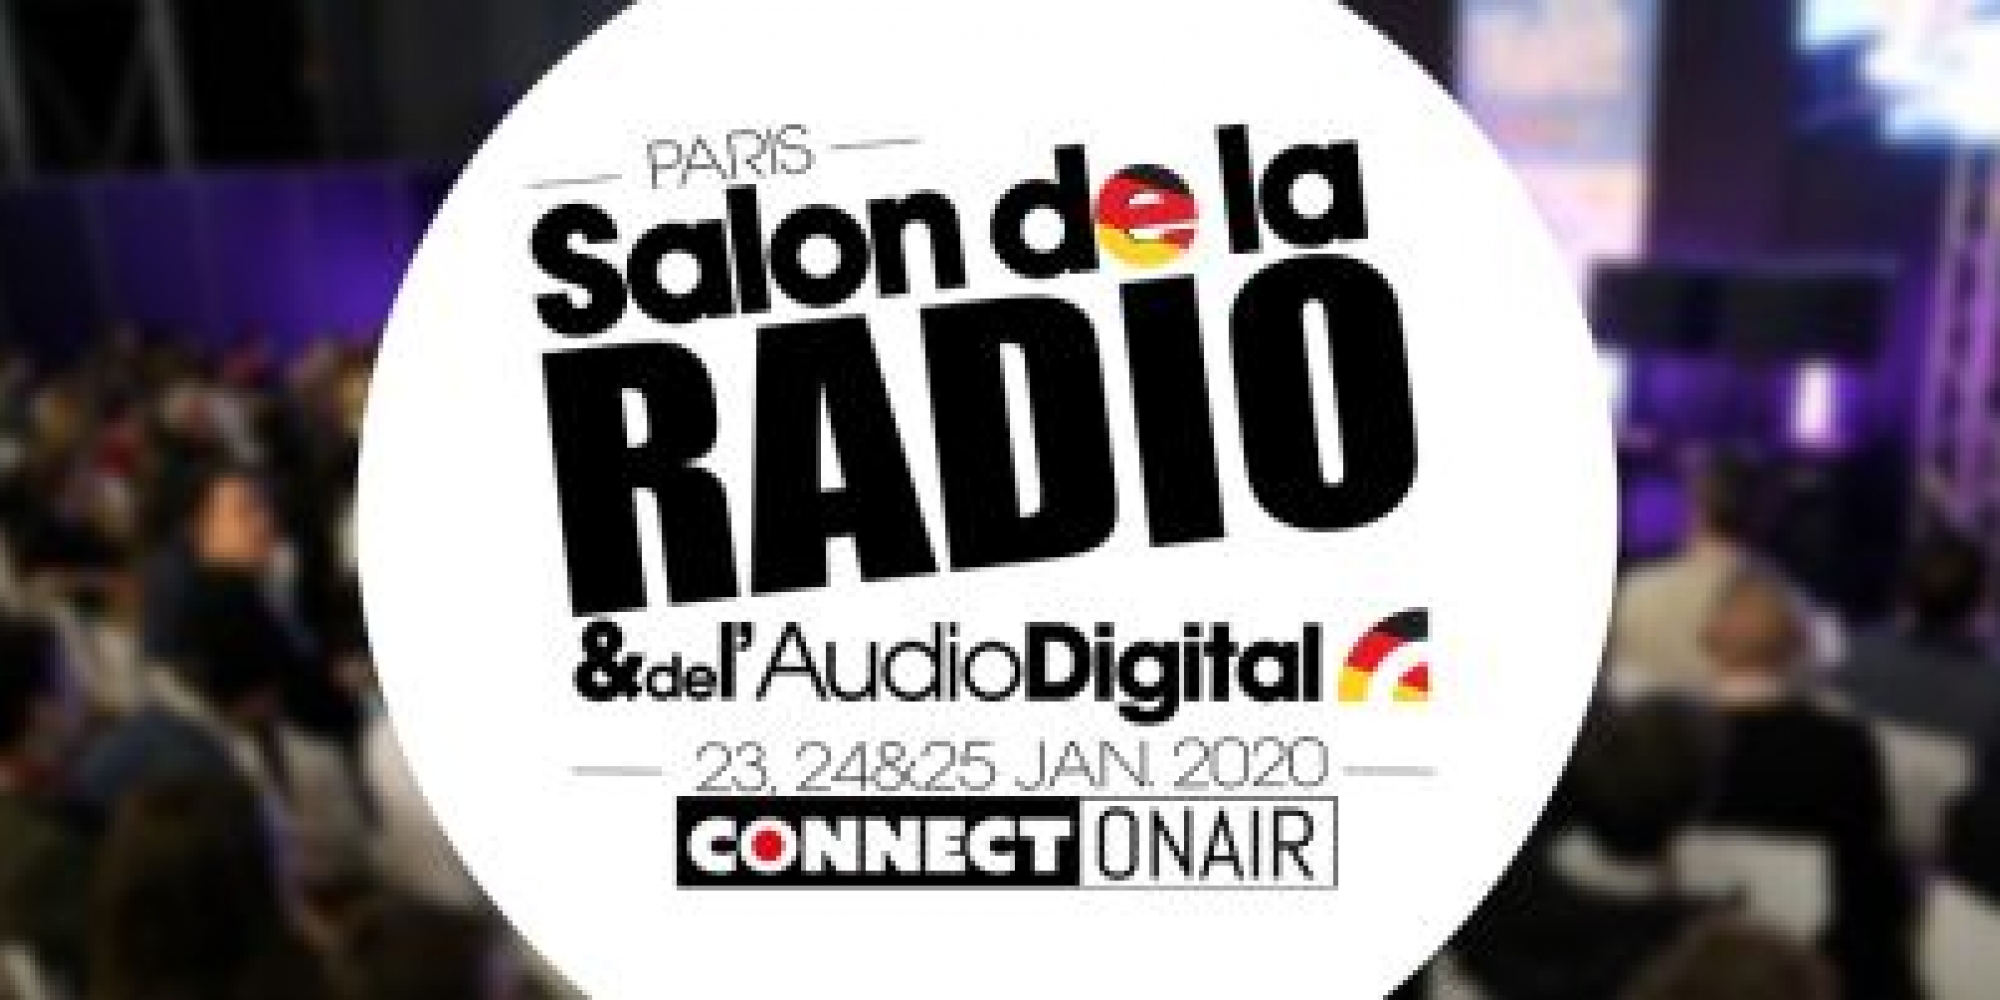 Lets meet at the European Radio and Digital Audio Show 2020